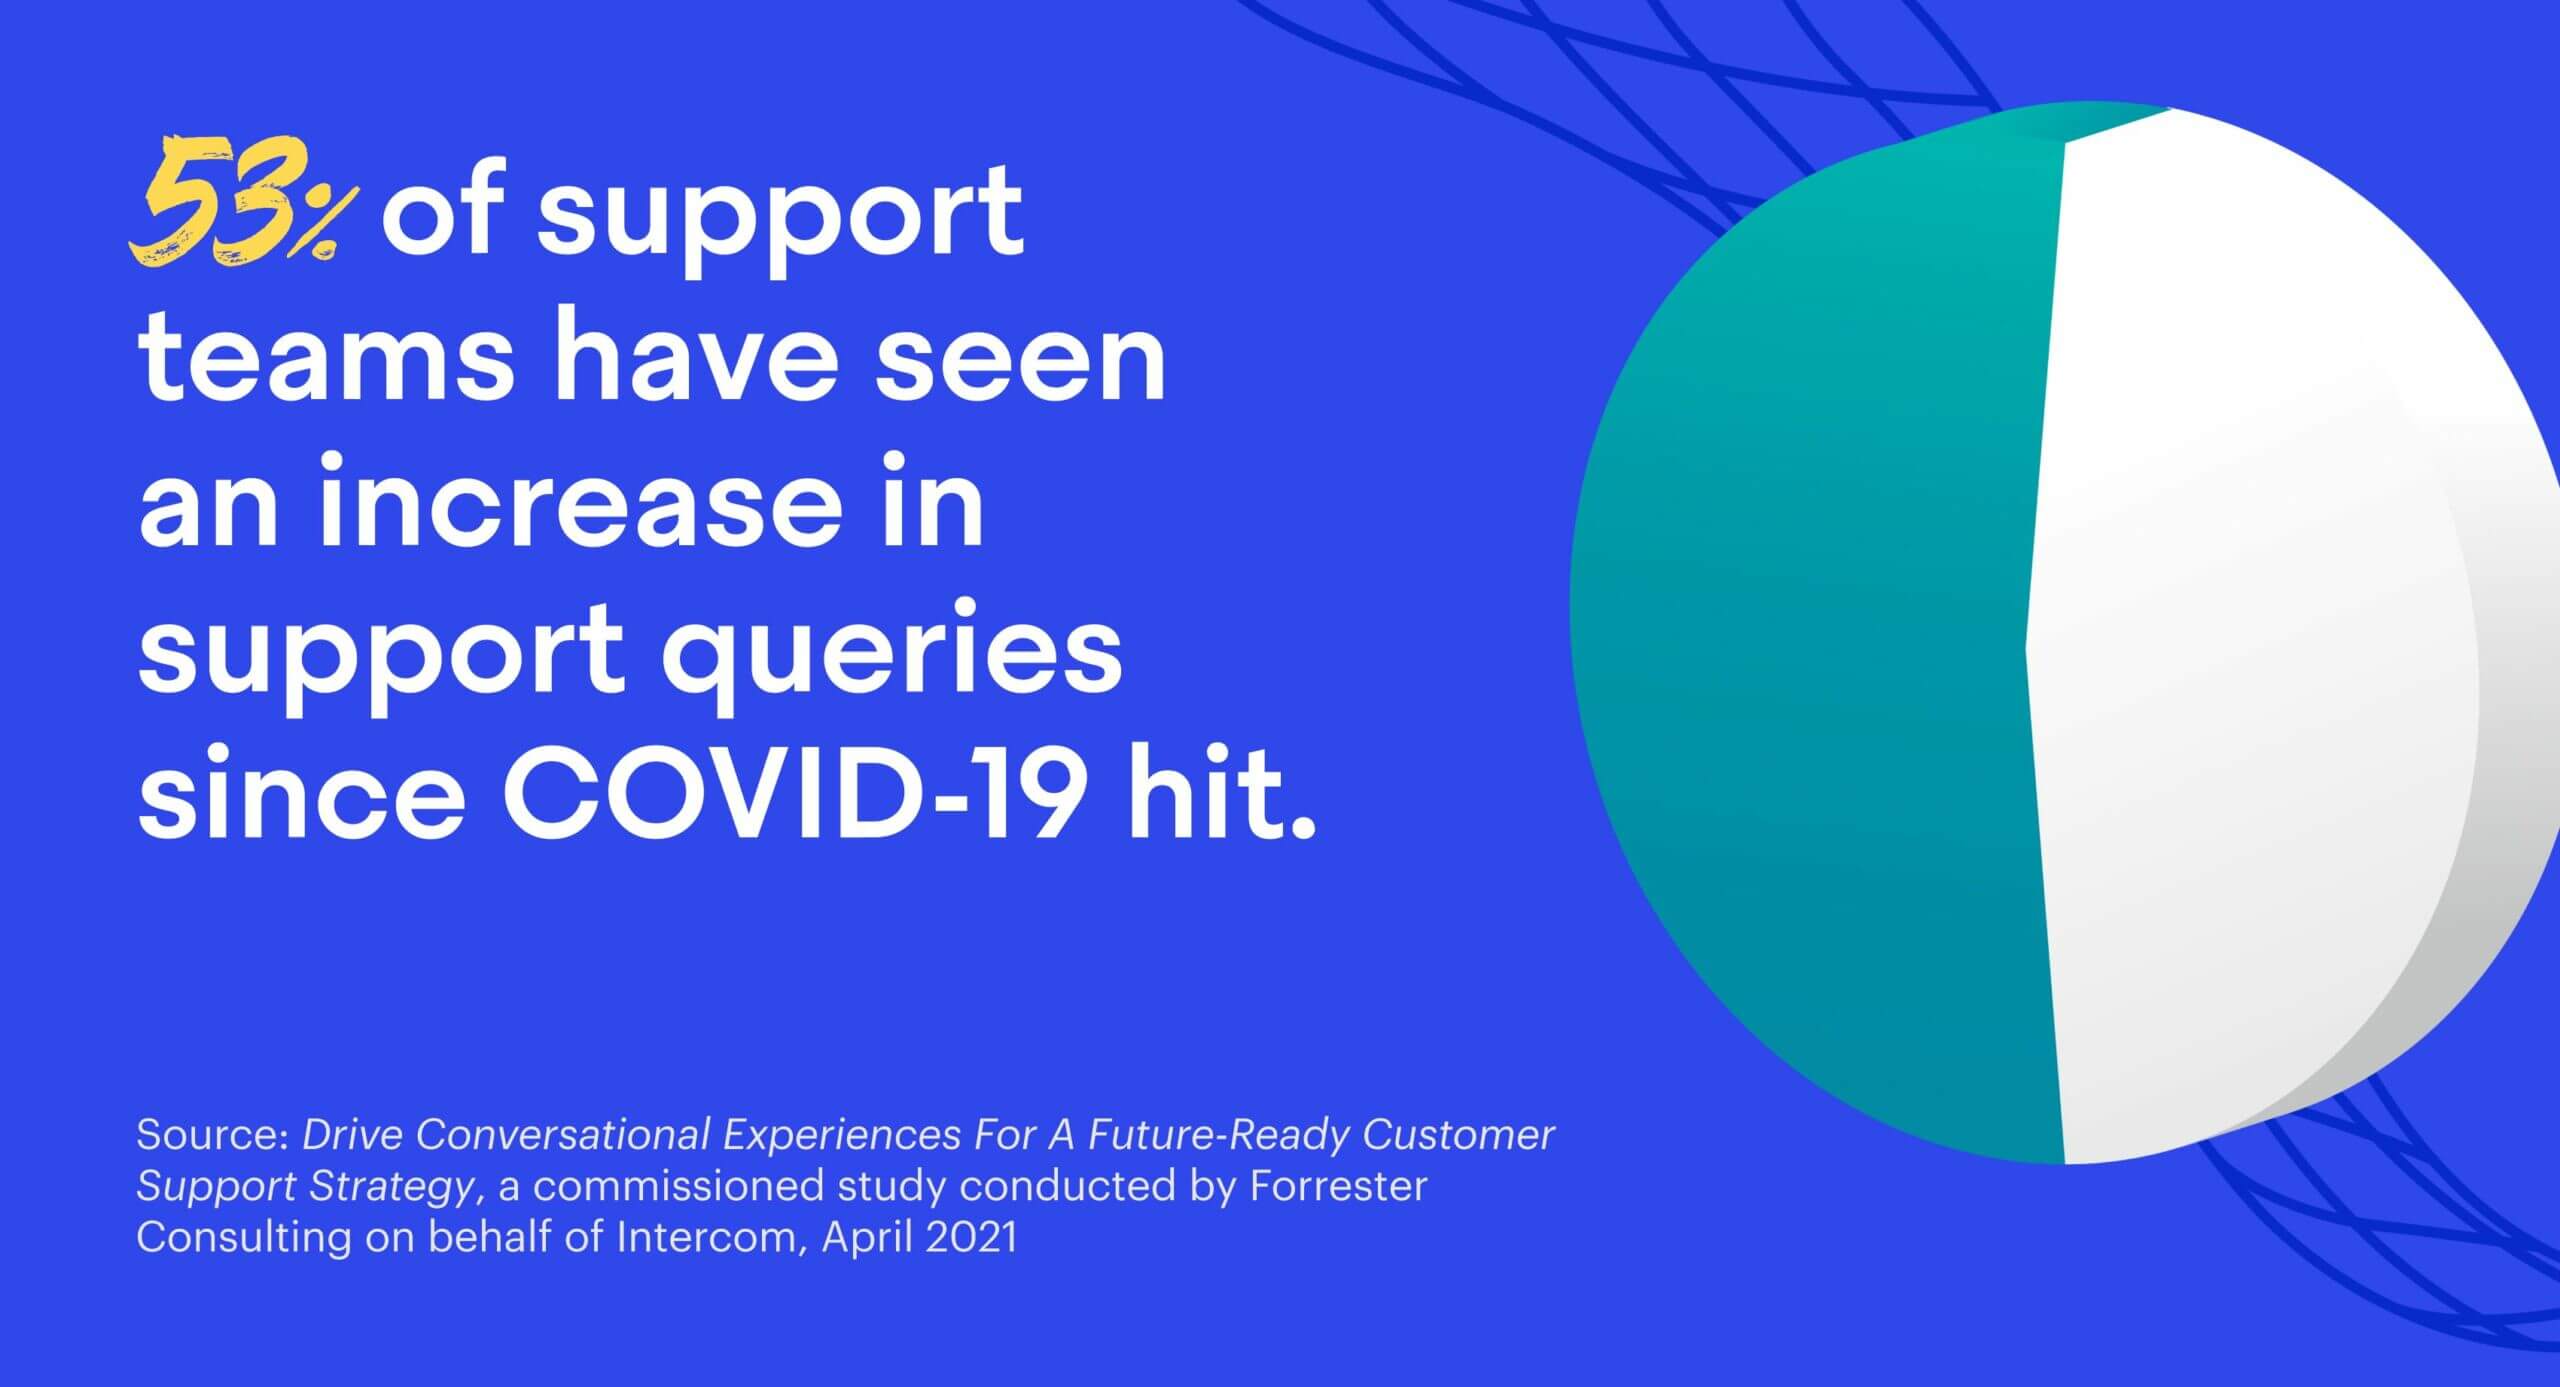 53% of support teams have seen a meaningful increase in support queries since COVID-19 hit.